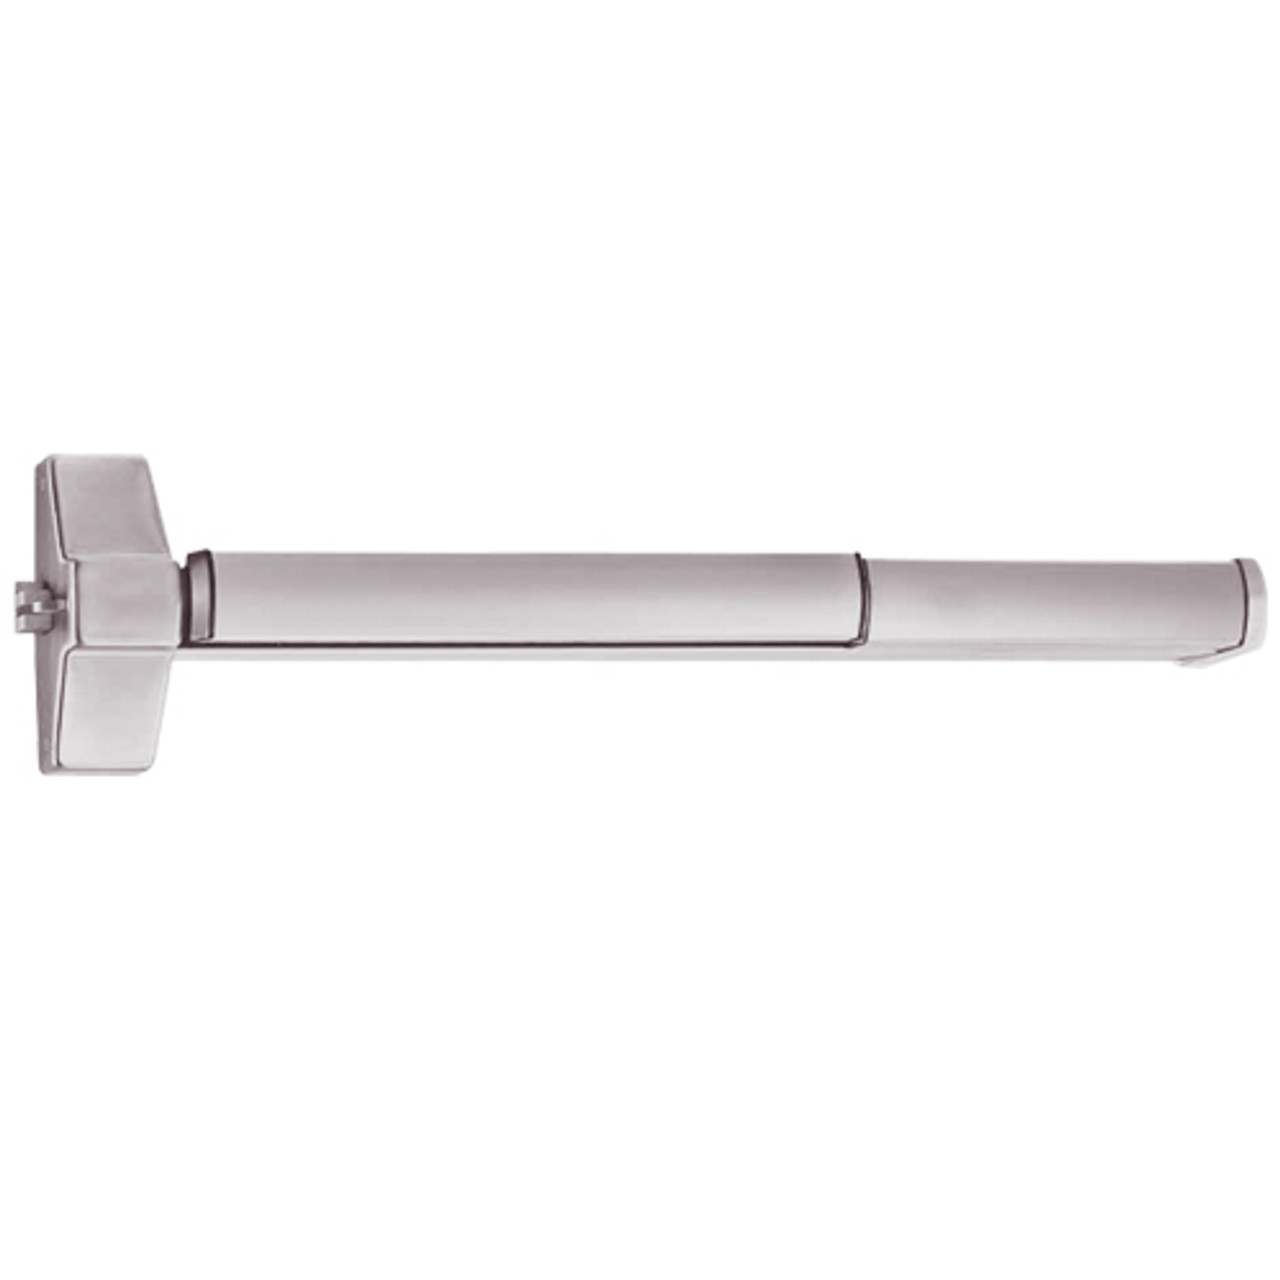 ED5200SA-630-MELR Corbin ED5200 Series Fire Rated Exit Device with Motor Latch Retraction in Satin Stainless Steel Finish